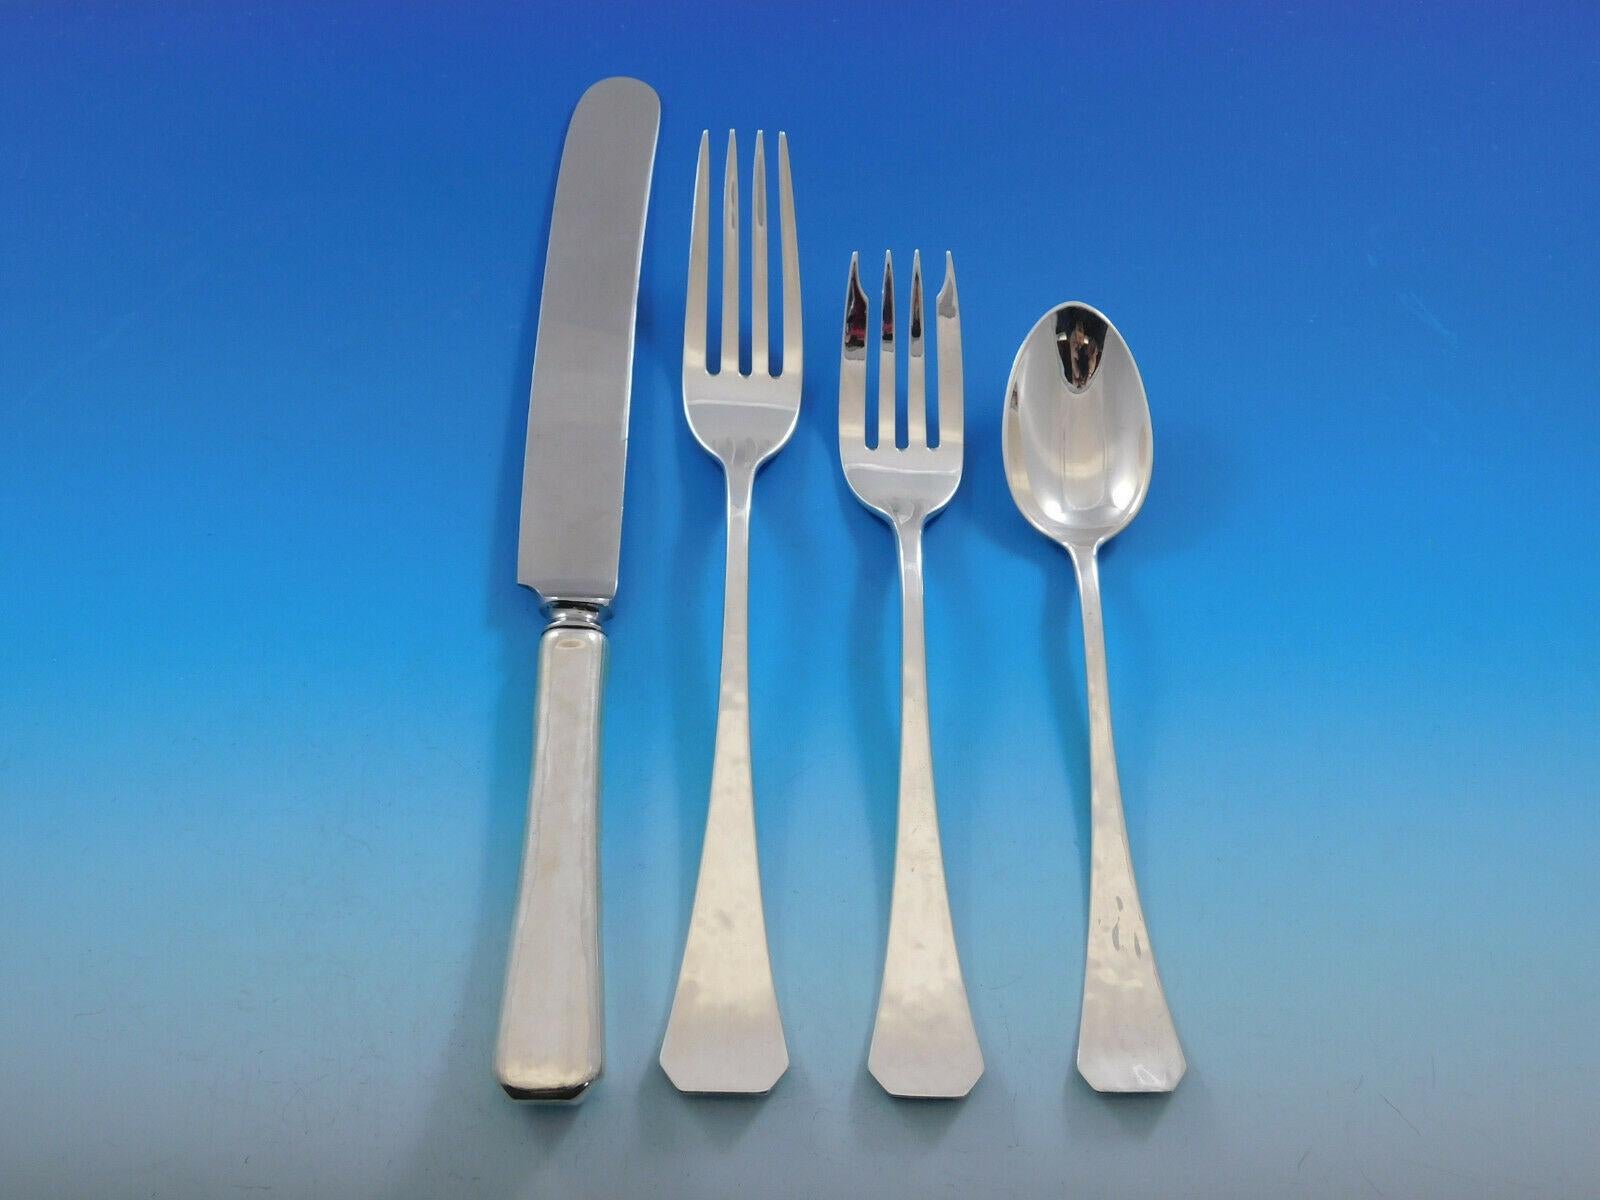 Square by Porter Blanchard hand-made sterling silver flatware set - 61 pieces. This set includes:

10 Dinner Knives, 9 1/8